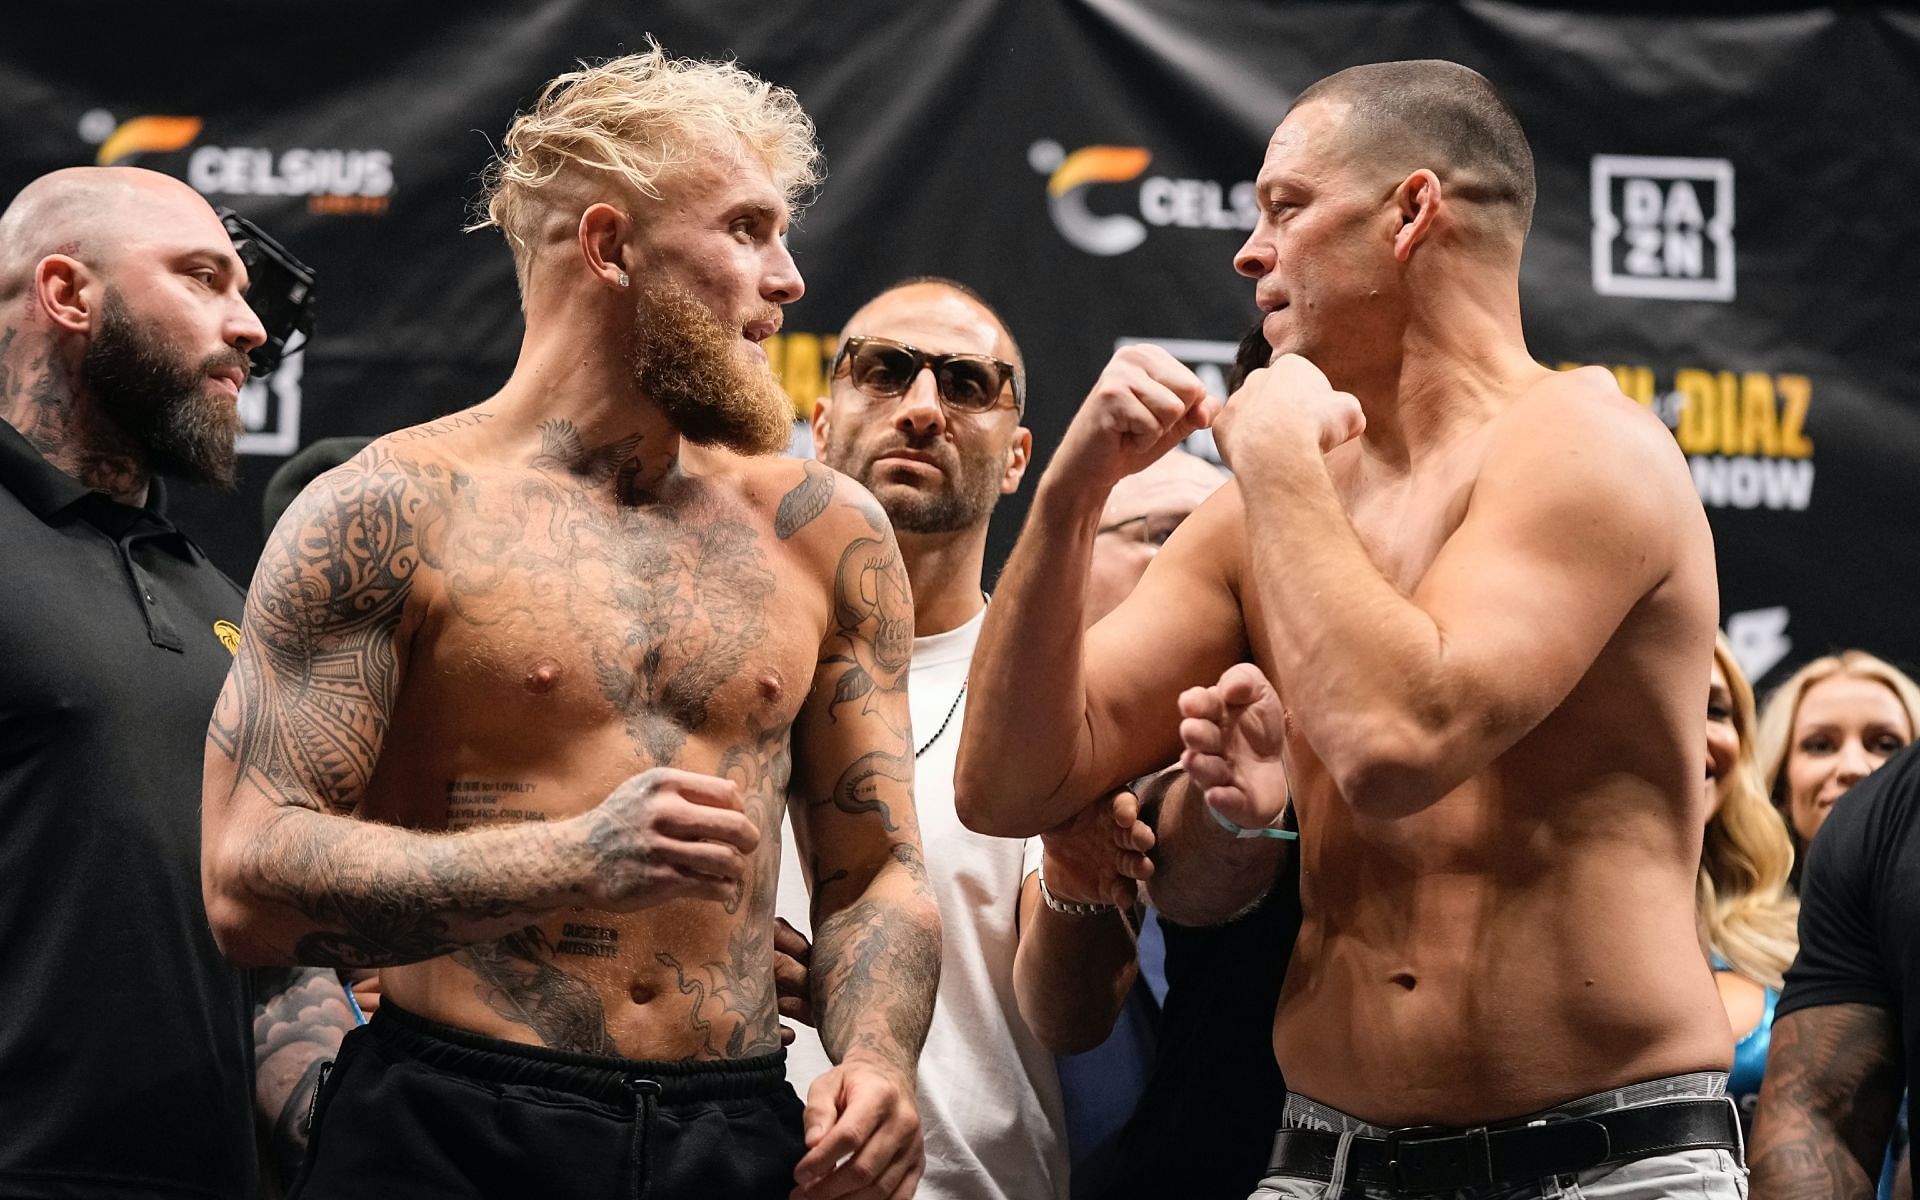 Jake Paul and Nate Diaz [Image credits: Getty Images]